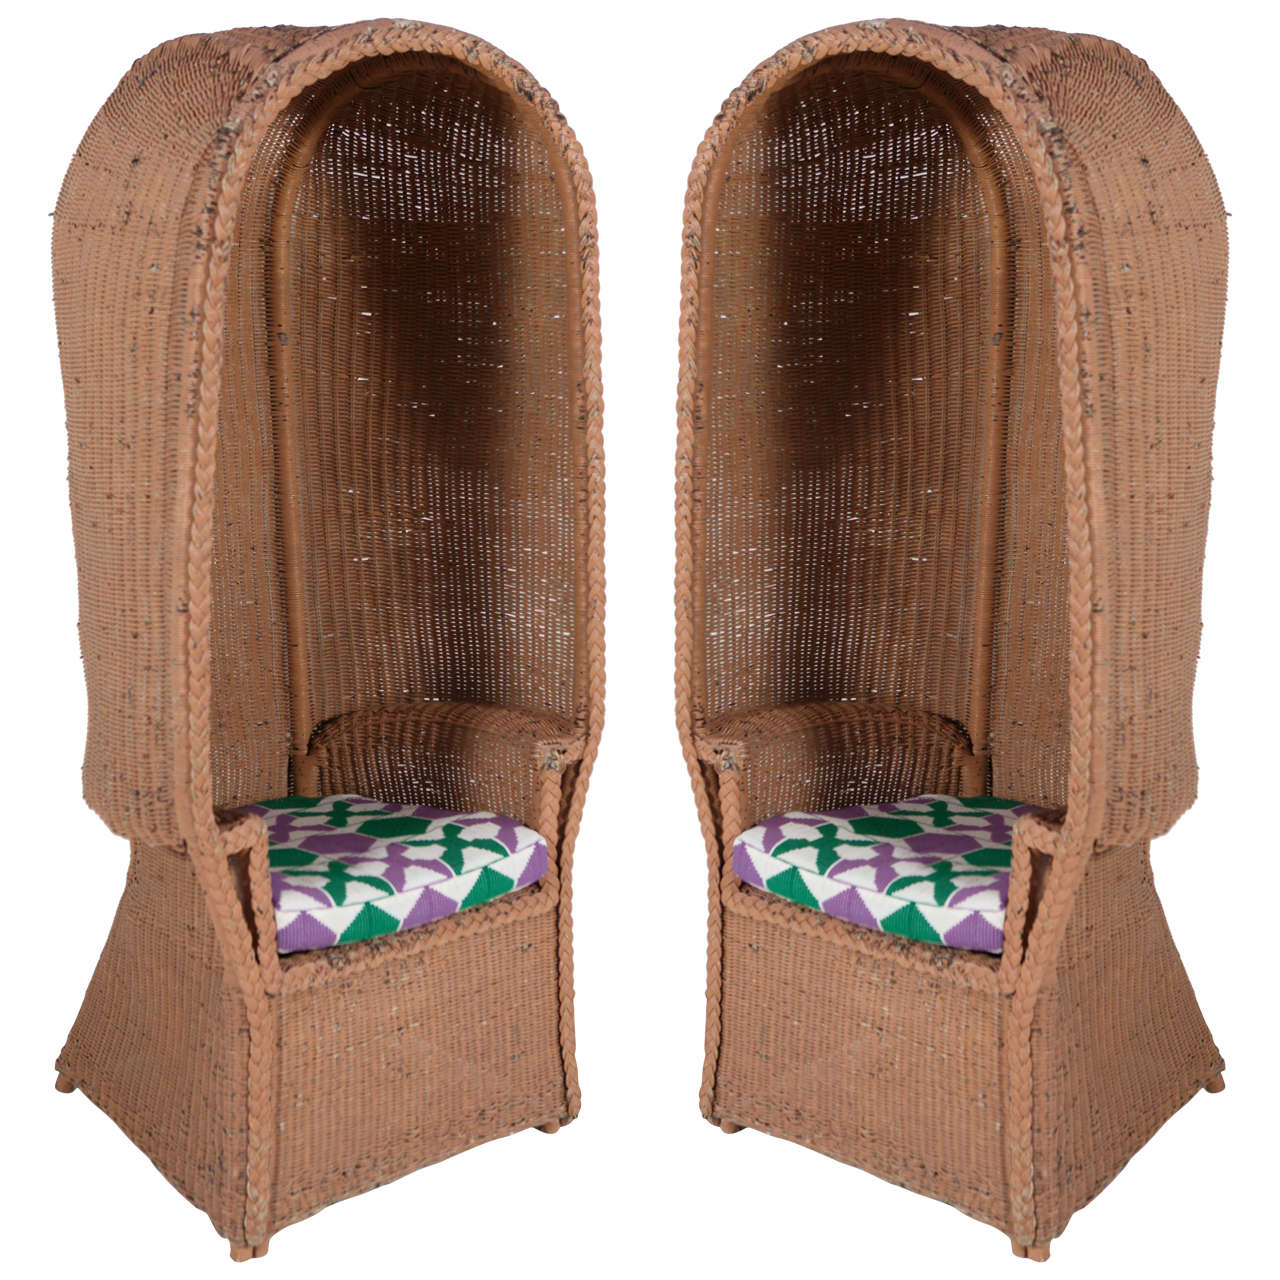 Pair of Wicker Hooded Chairs with African Fabric